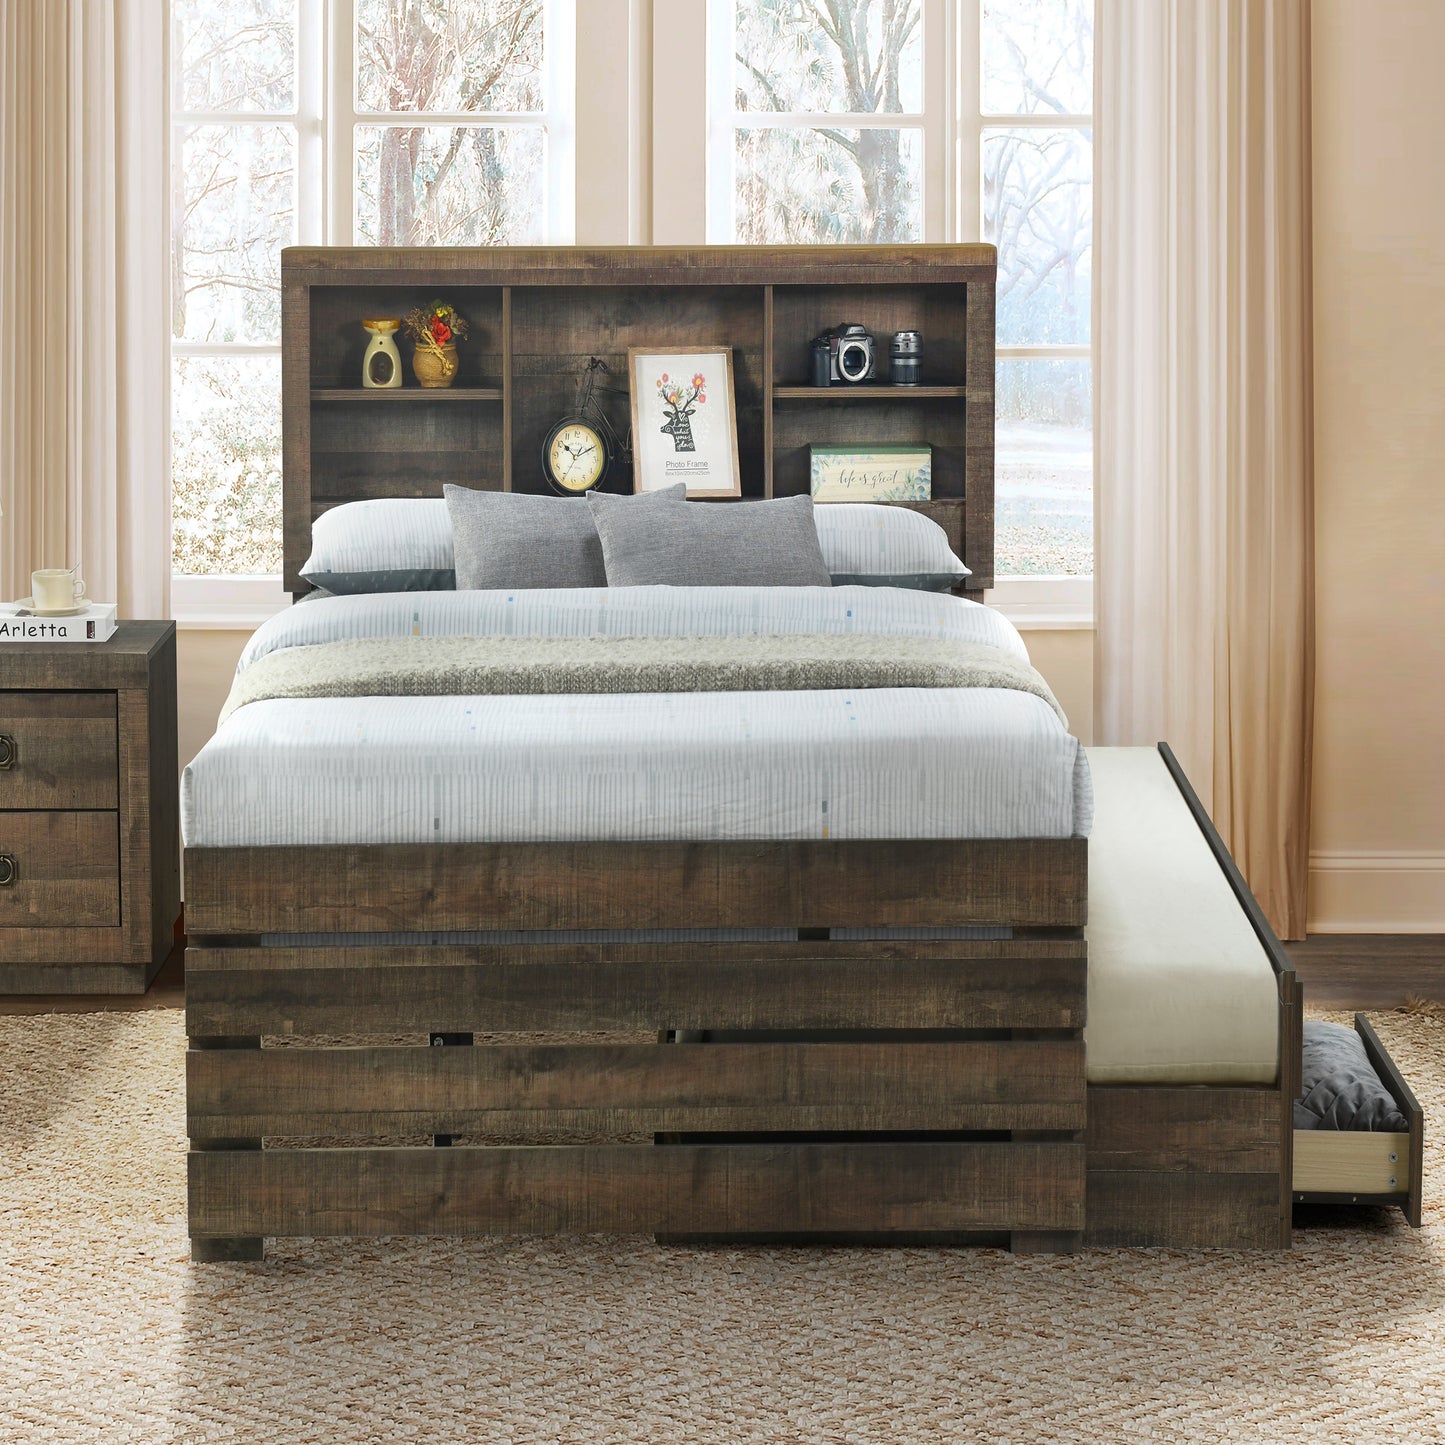 Jordan Farmhouse Style Twin Size Bookcase Captain Bed and Nightstand in Rustic Brown